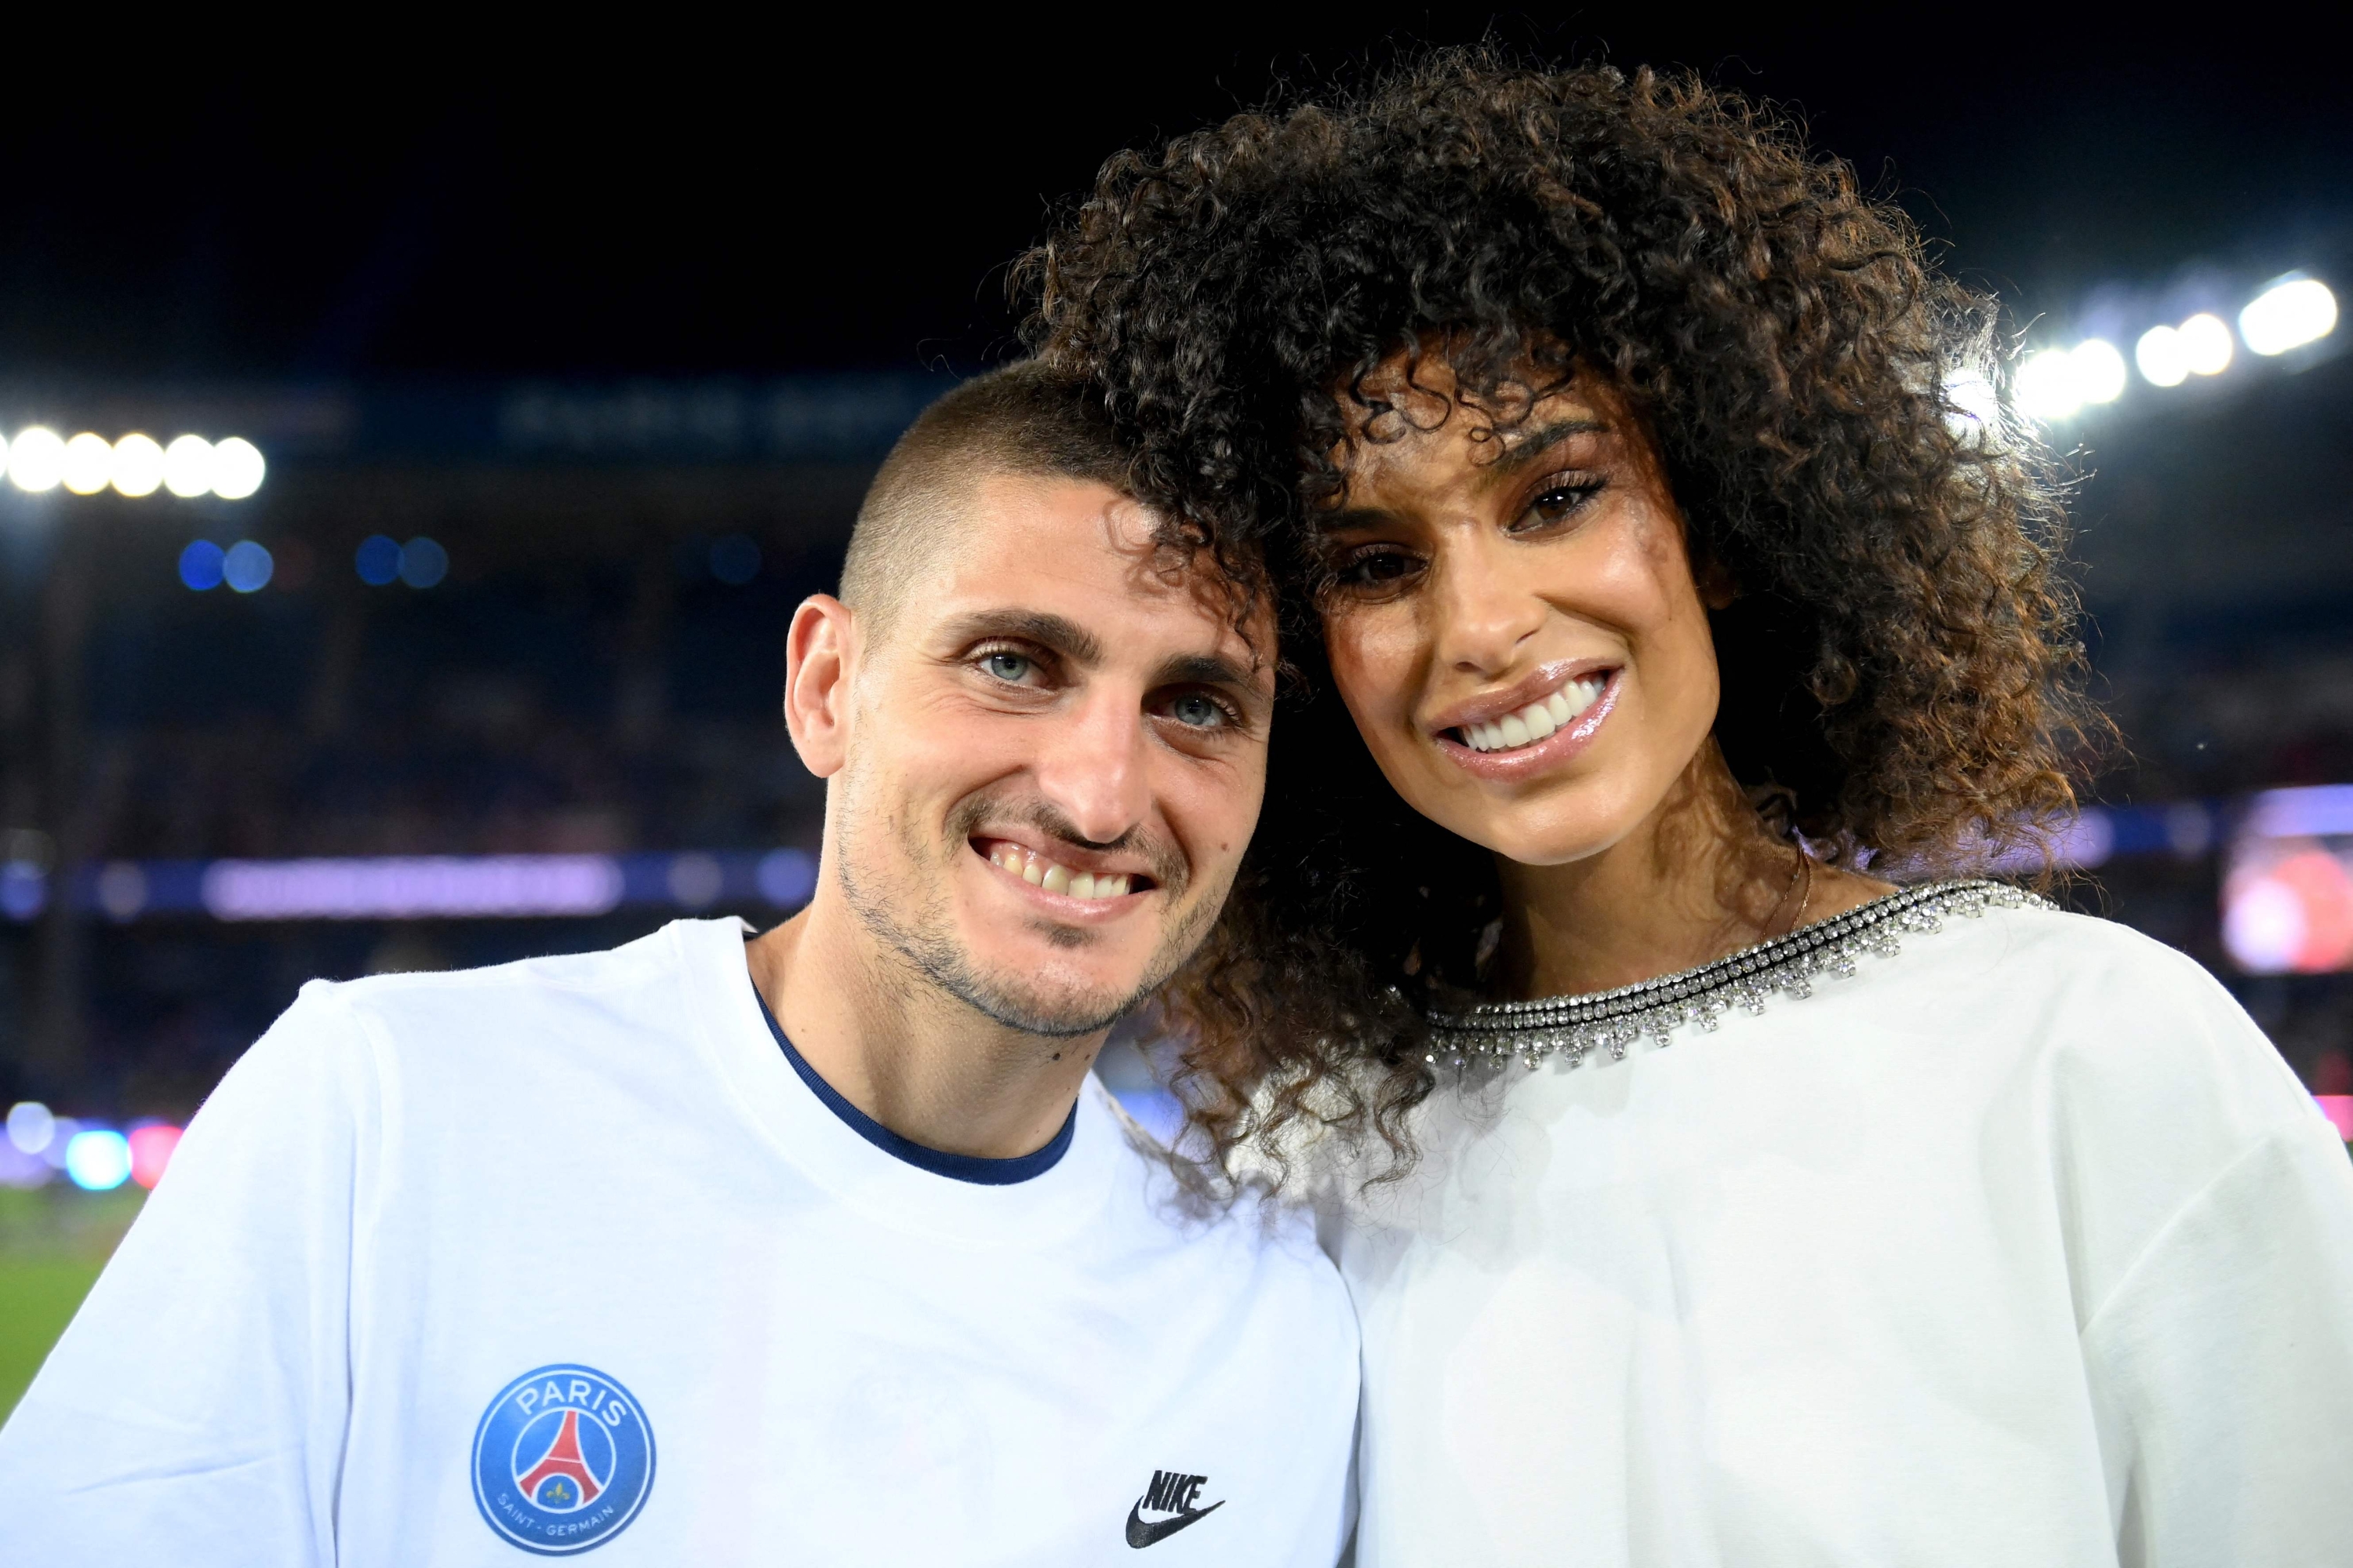 Paris Saint-Germain's Italian midfielder Marco Verratti poses with his wife Jessica Aidi Veratti during the 2022-2023 Ligue 1 championship trophy ceremony following the L1 football match between Paris Saint-Germain (PSG) and Clermont Foot 63 at the Parc des Princes Stadium in Paris on June 3, 2023. (Photo by FRANCK FIFE / POOL / AFP)